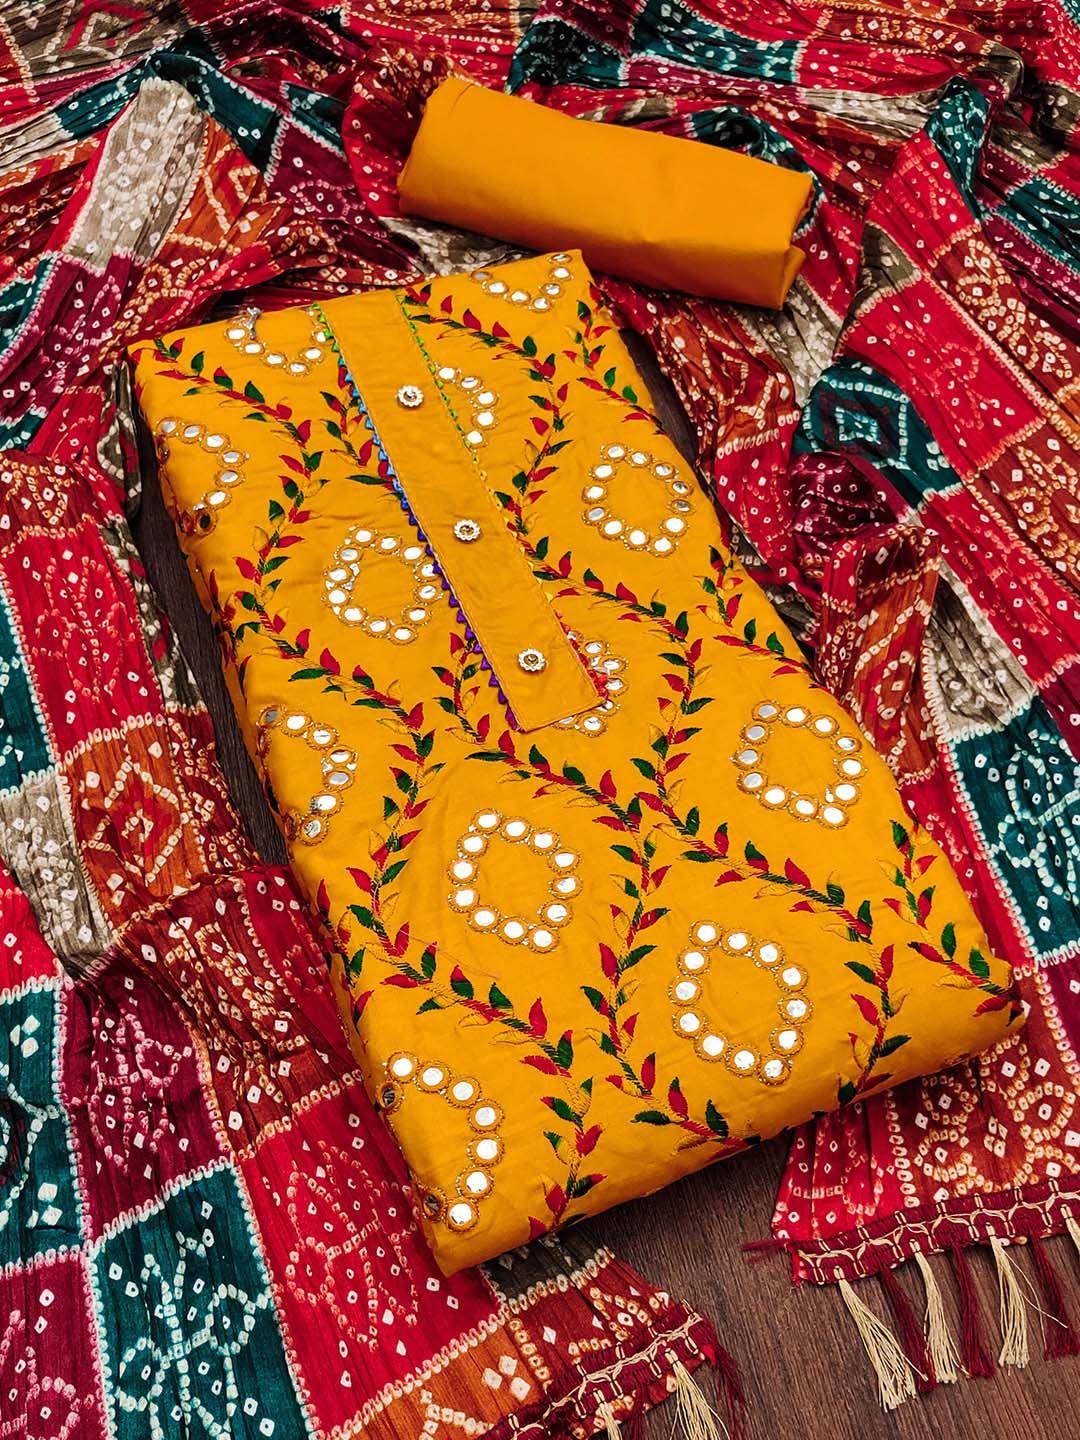 shadow-&-saining-yellow-&-red-embroidered-pure-cotton-unstitched-dress-material